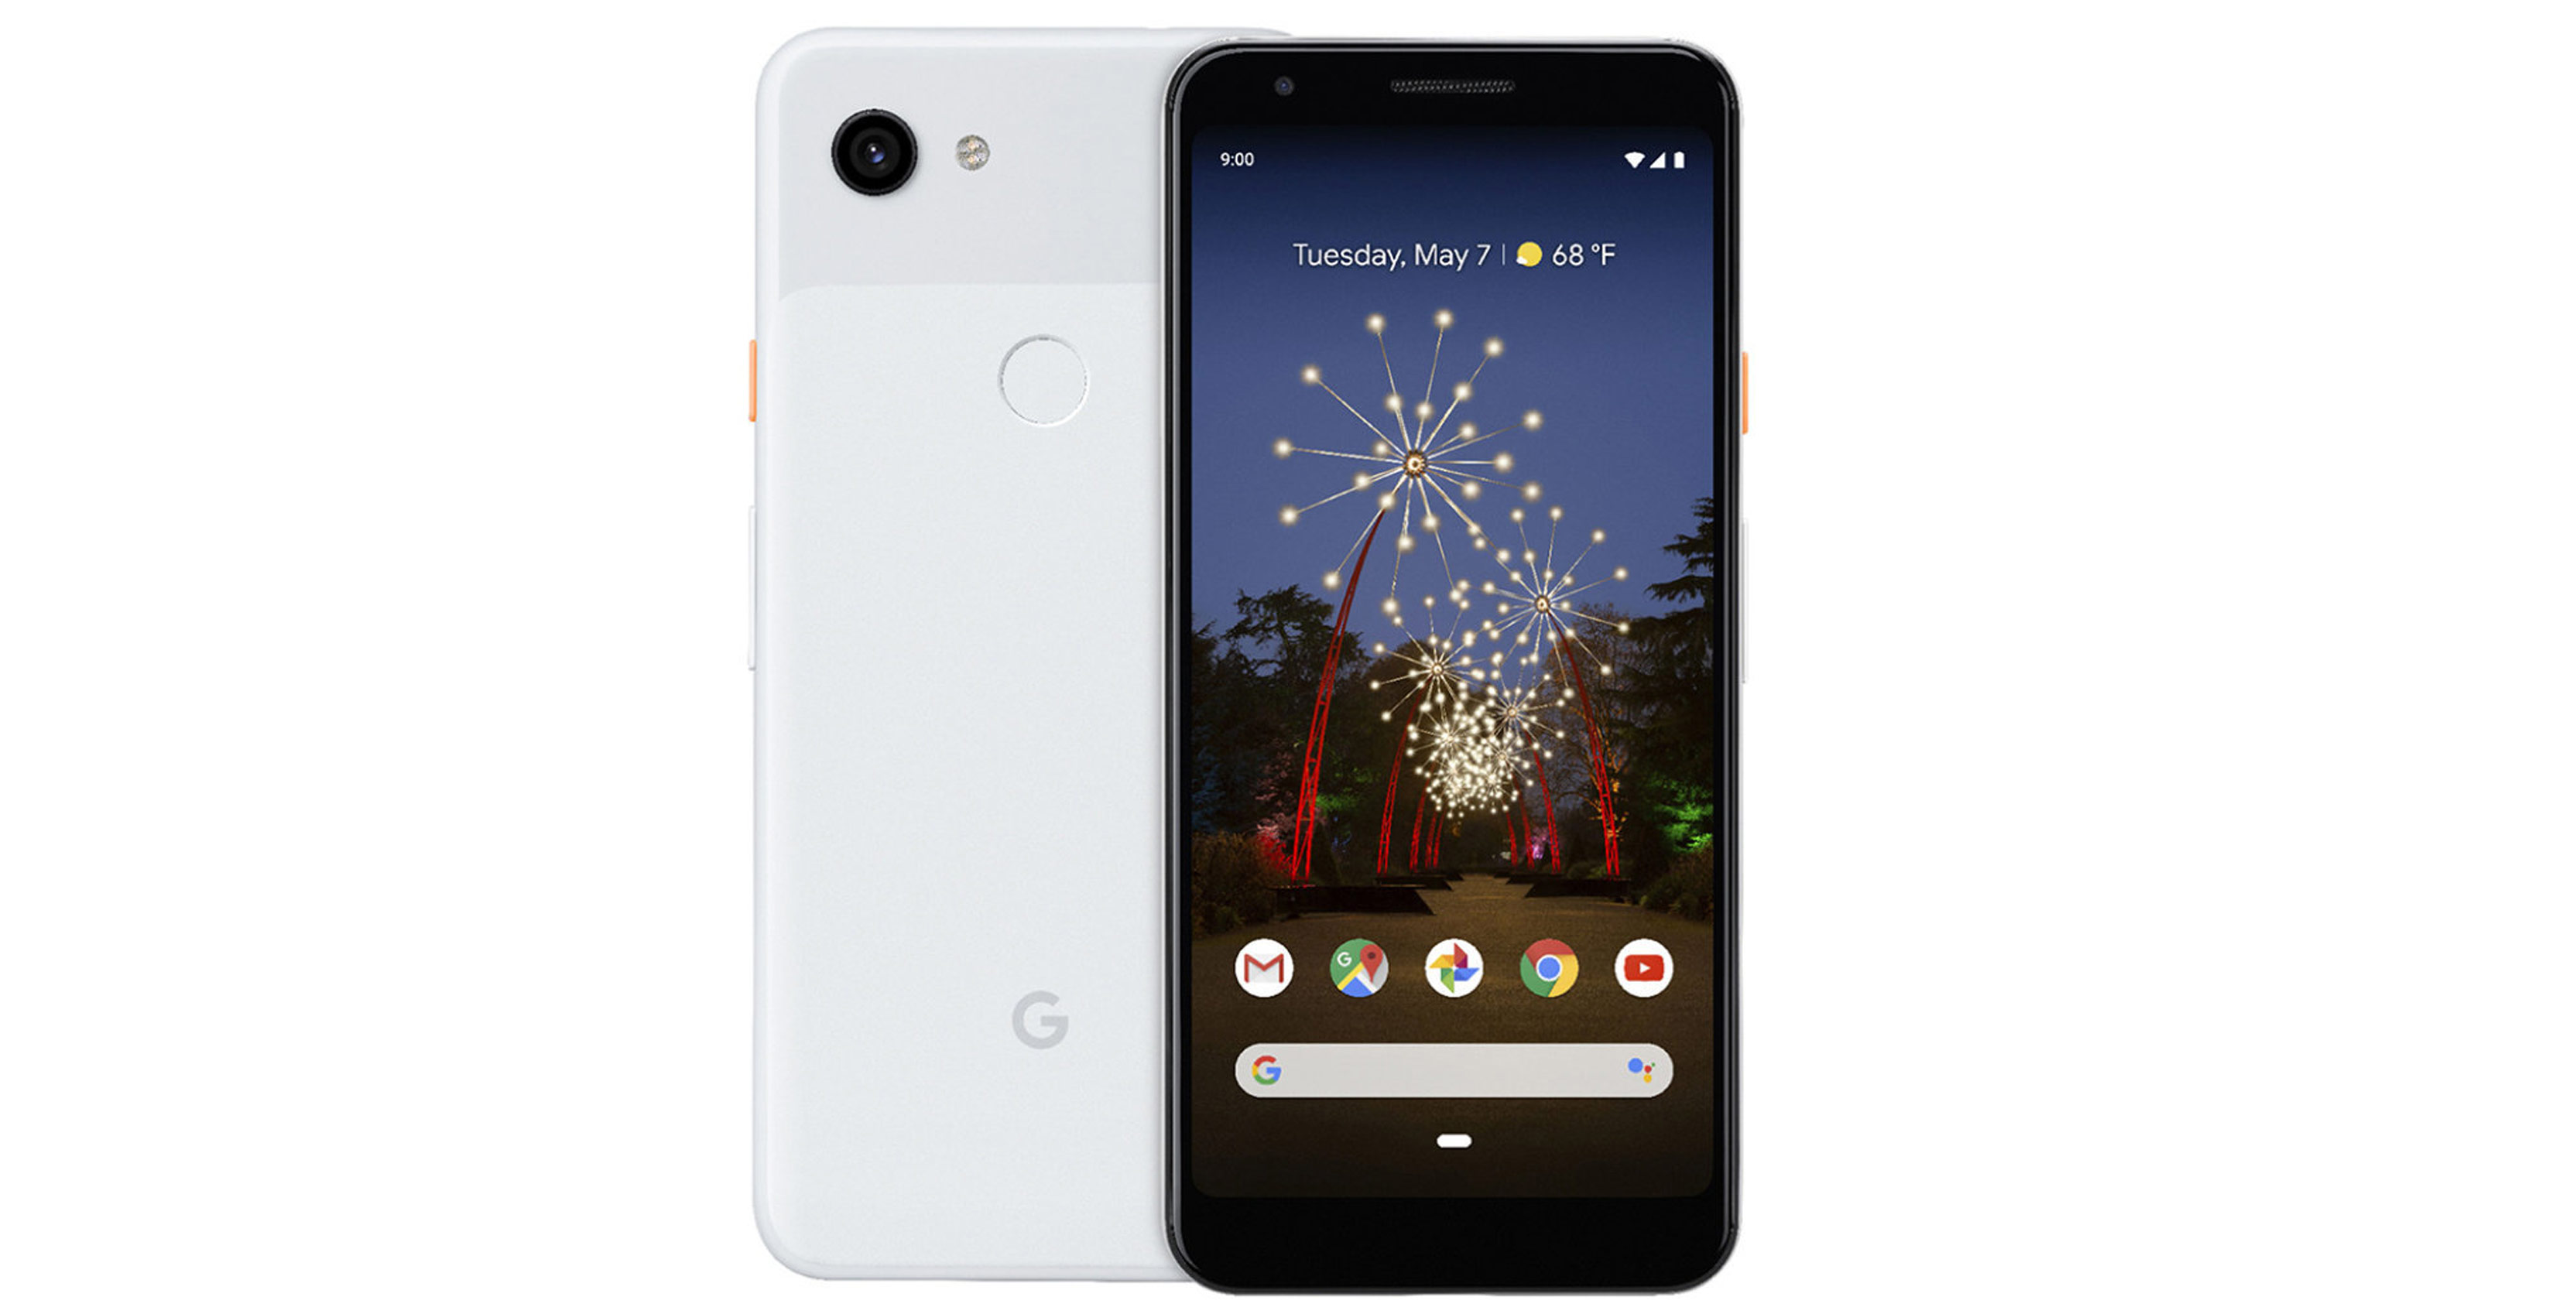 Google's upcoming Pixel 3a smartphone